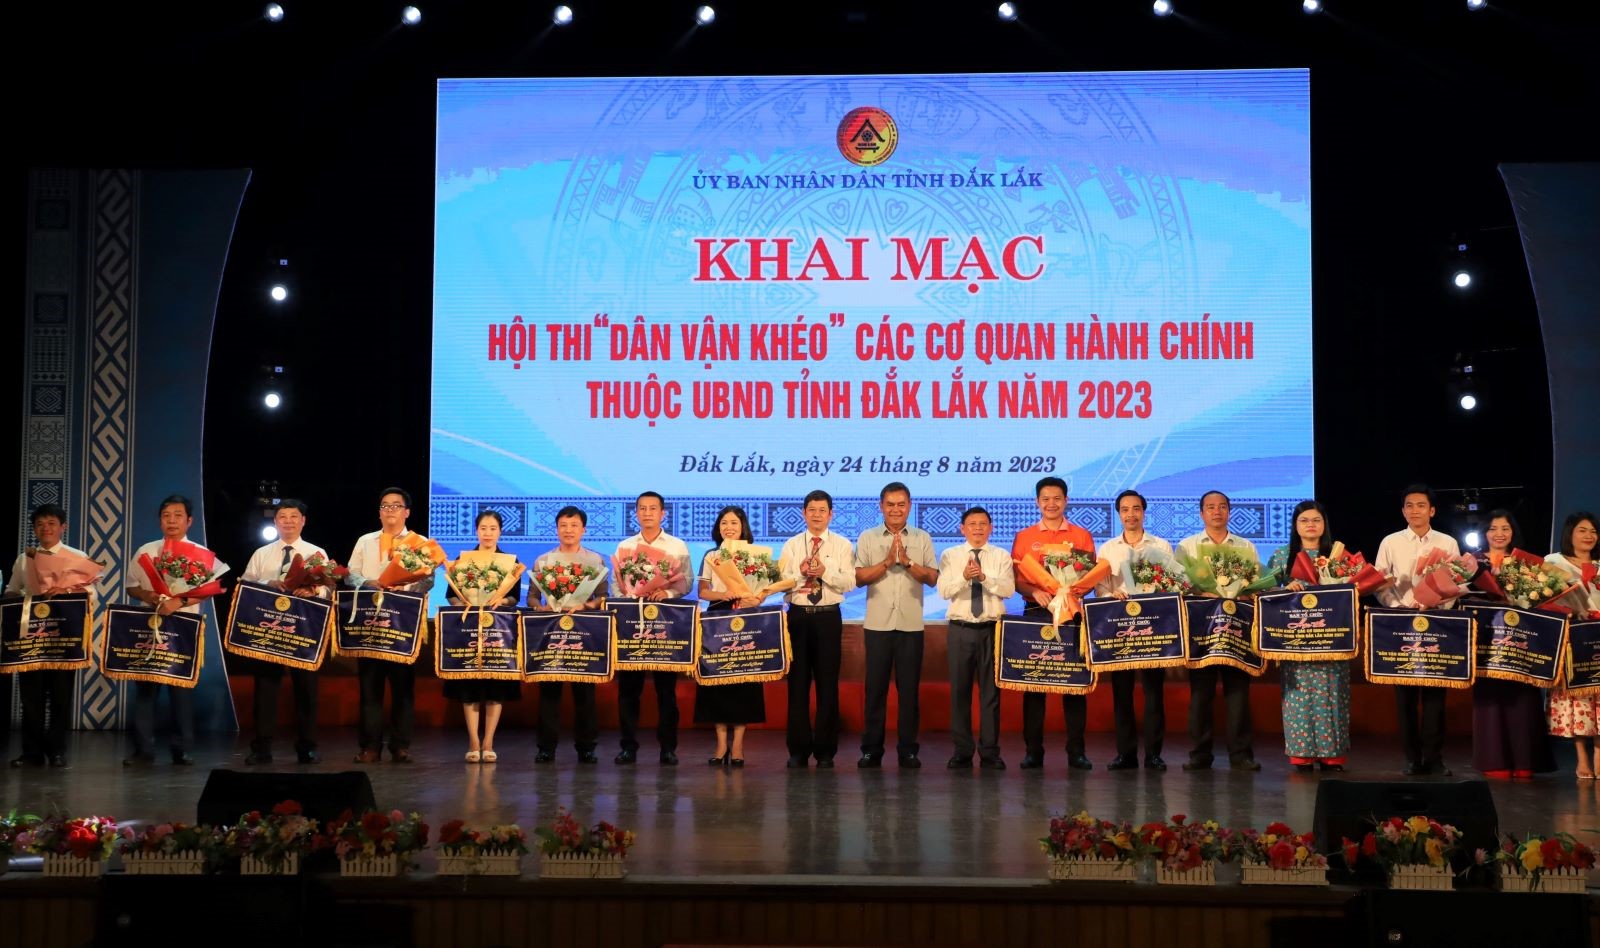 Opening Ceremony of the "Skillful Mass Communications" Competition for Administrative Agencies under the Provincial People's Committee of Dak Lak 2023